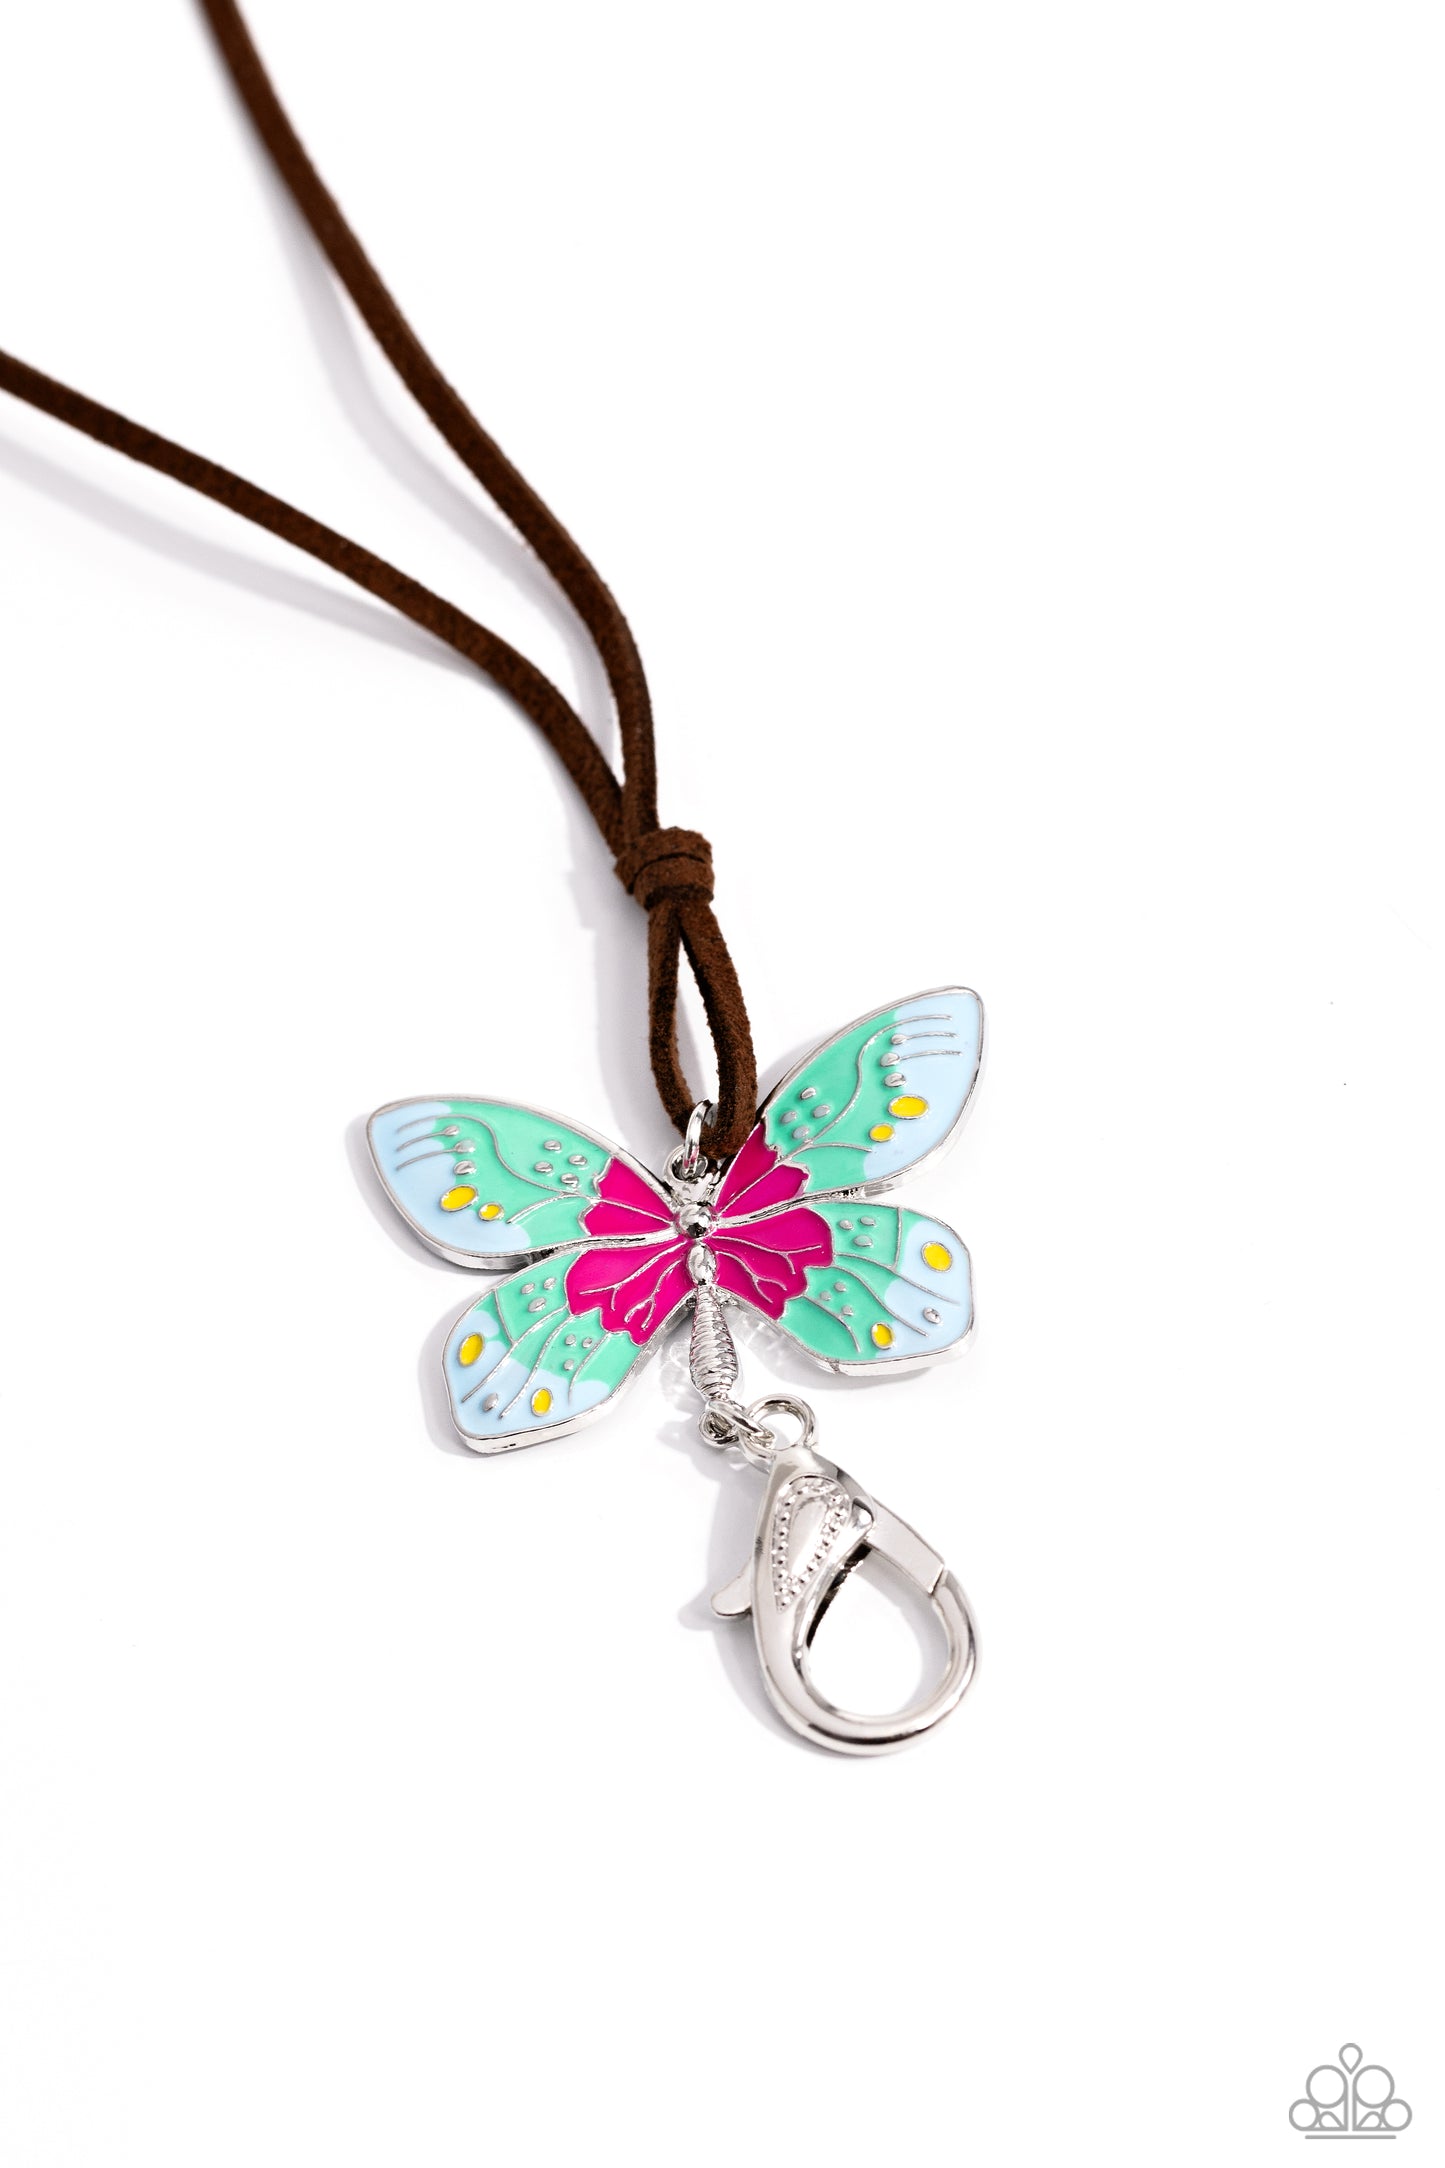 Winged Wanderer Blue Butterfly Lanyard - Paparazzi Accessories  Featuring an ombre effect of light blue to turquoise to hot pink and accents of yellow, a vivacious oversized butterfly flutters at the bottom of a knotted lengthened strand of brown suede for a wanderlust statement. A lobster clasp hangs from the bottom of the design to allow a name badge or other item to be attached. Features an adjustable tie closure. Sku:  P2LN-BLXX-126XX